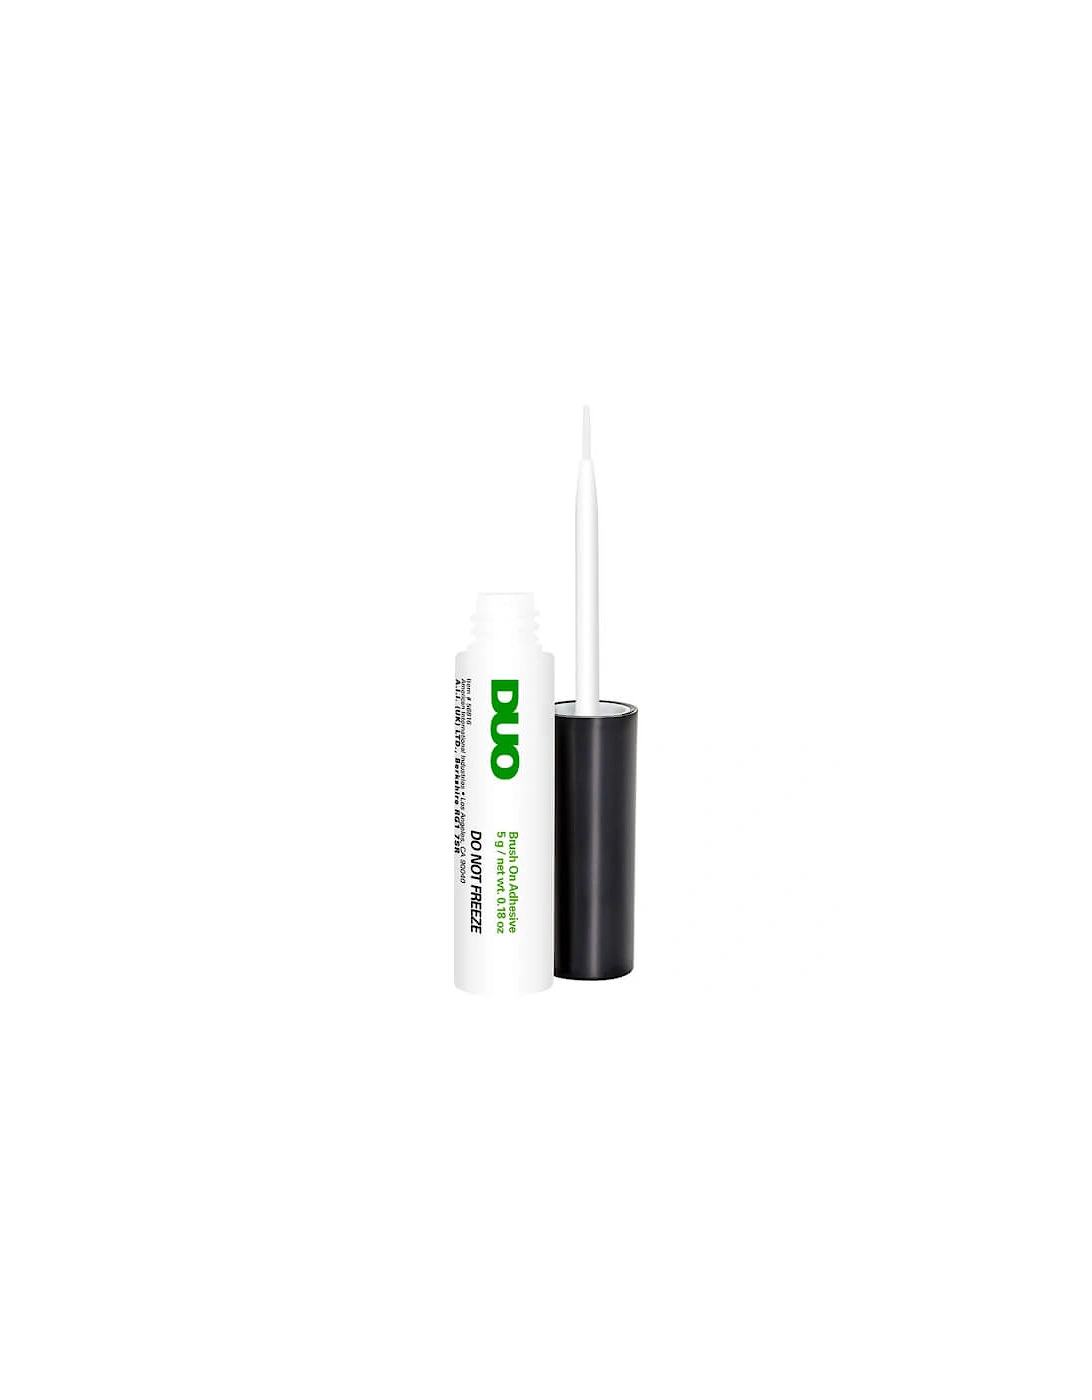 Duo Non-Latex Lash Adhesive - White/Clear, 2 of 1